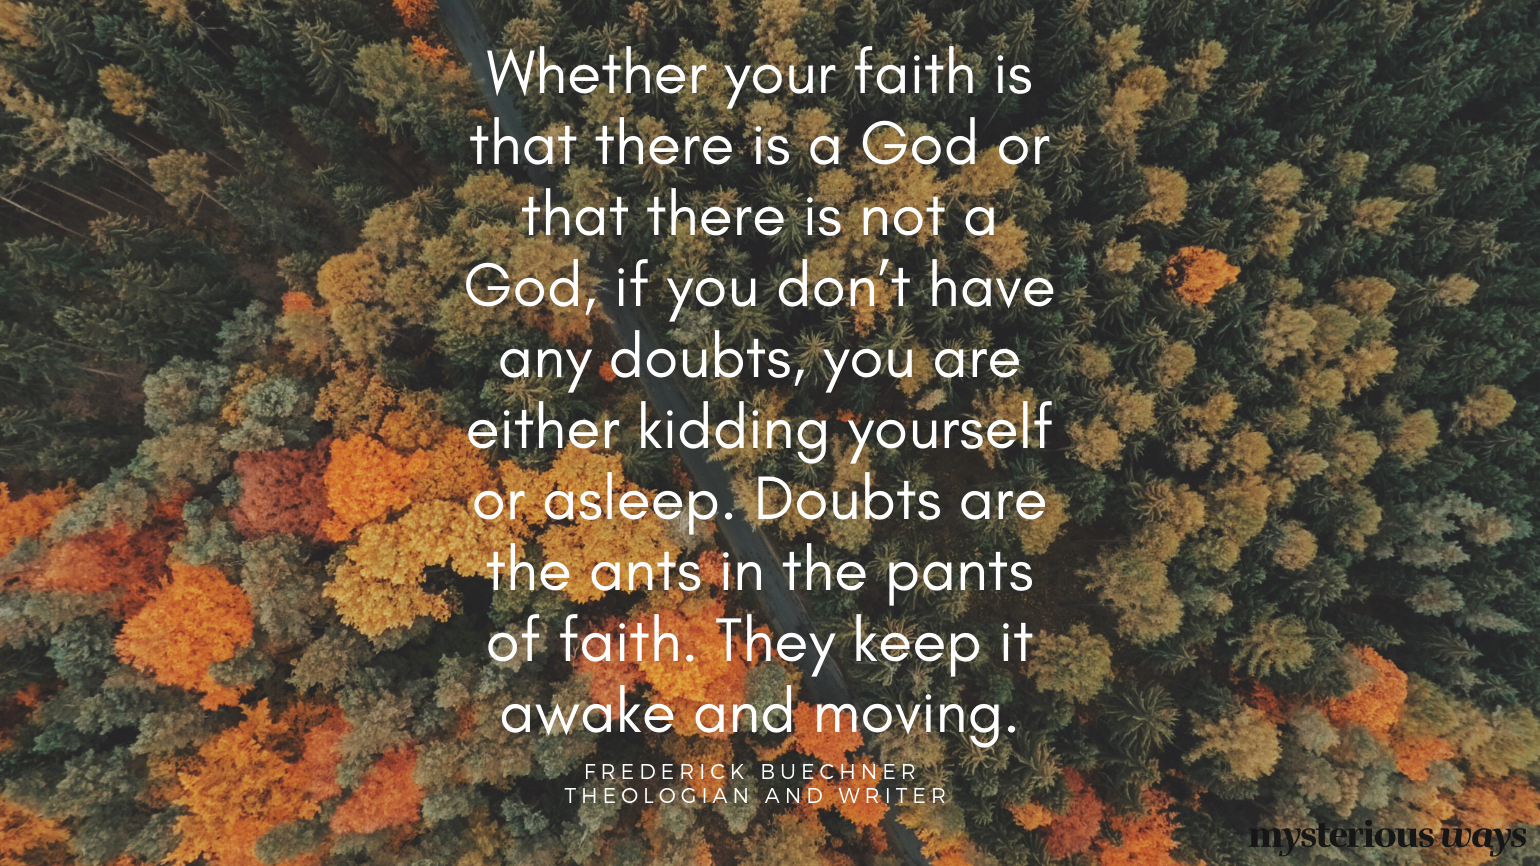 “Whether your faith is that there is a God or that there is not a God, if you don’t have any doubts, you are either kidding yourself or asleep. Doubts are the ants in the pants of faith. They keep it awake and moving.”